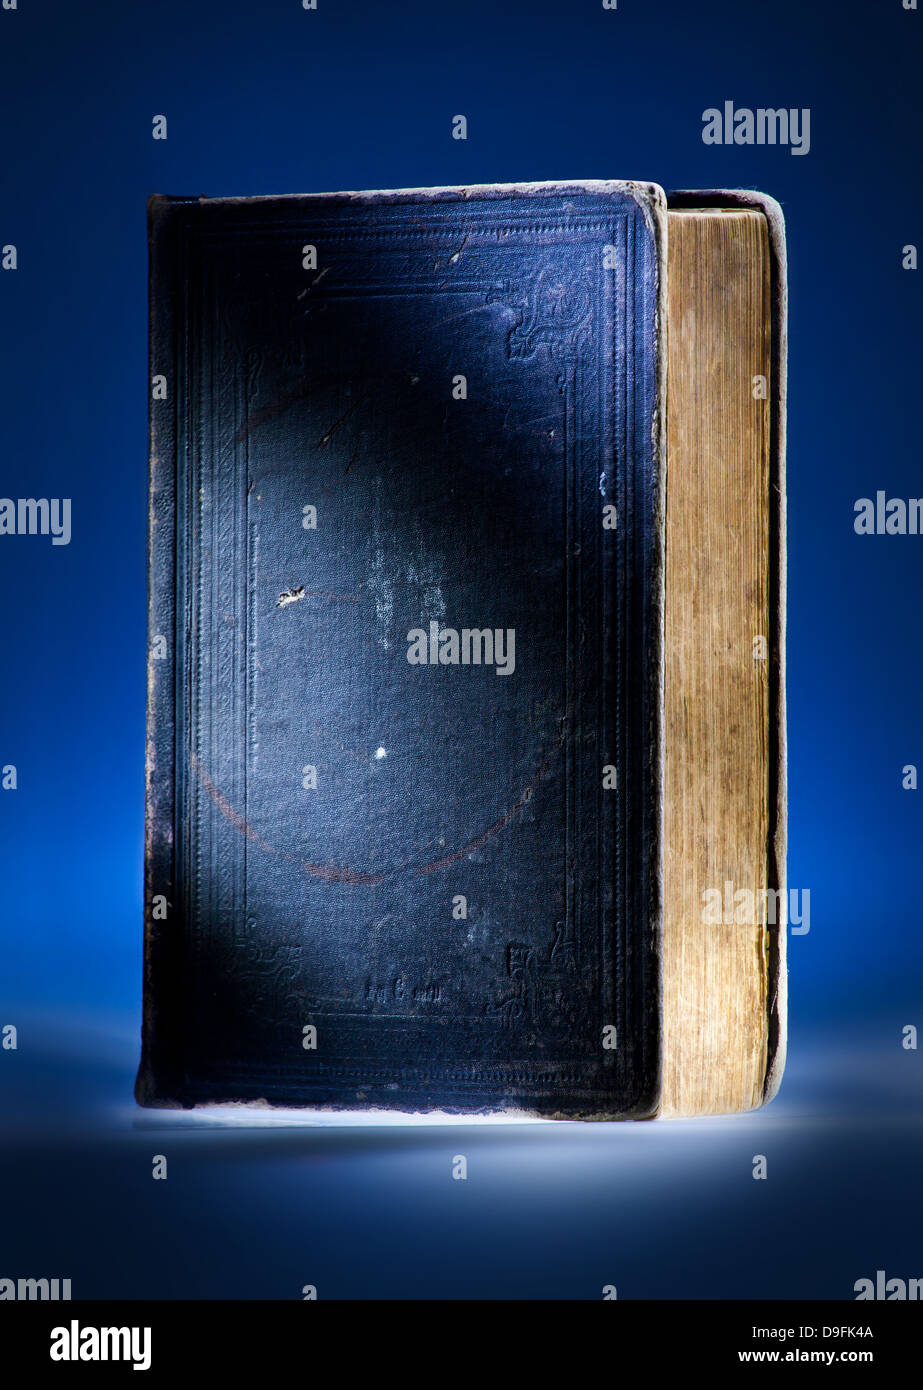 Old book, mystical blue light background Stock Photo